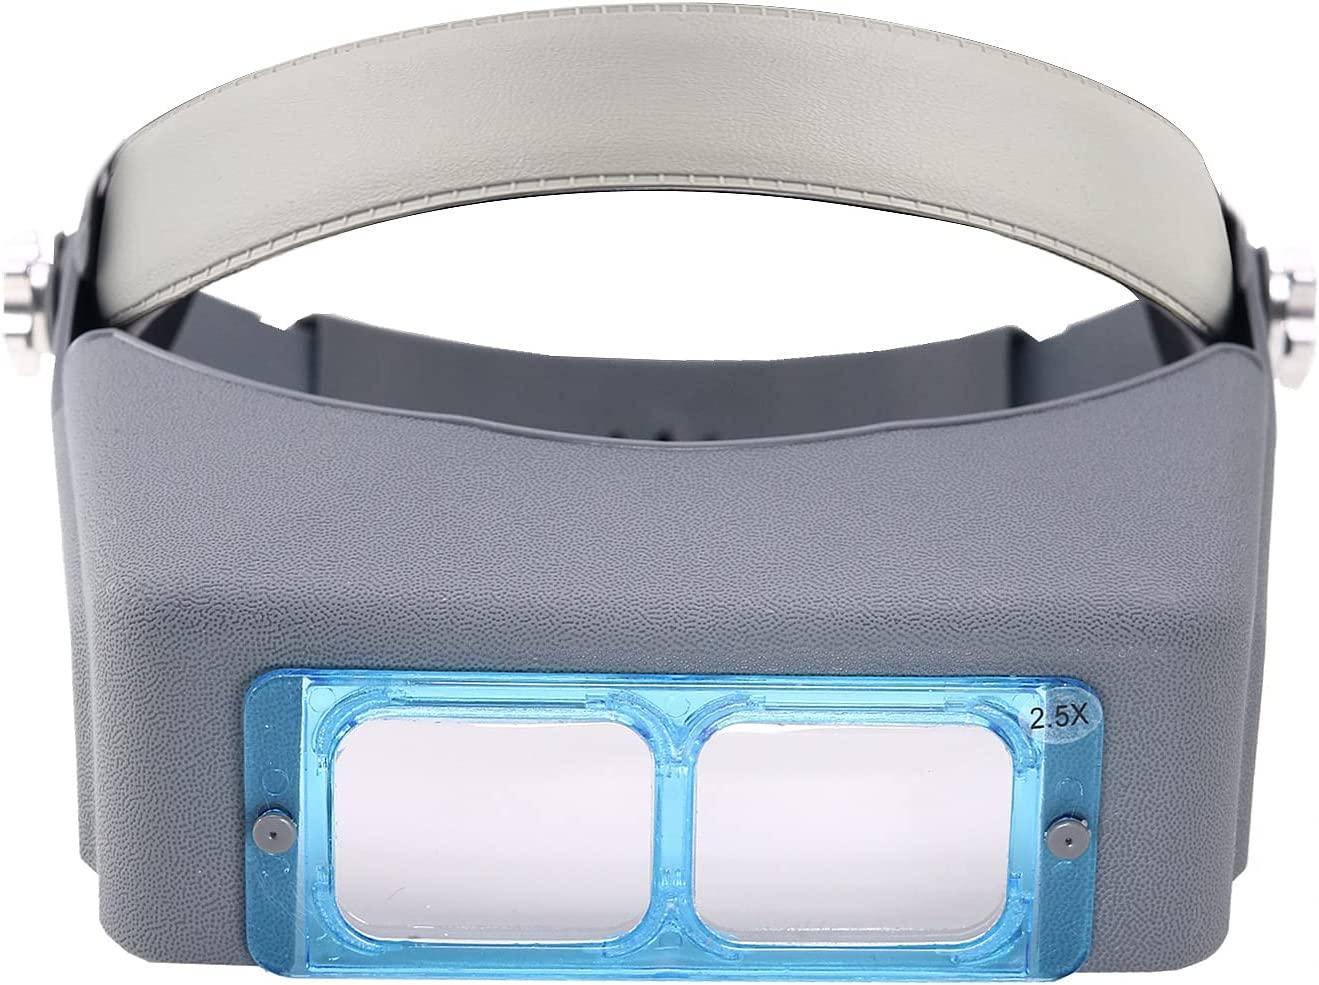 Elechood Headband Magnifier, Professional Double Lens Head-mounted Loupe Jewelry Magnifier, Reading Visor Opitcal Glass Binocular Magnifier with Lens